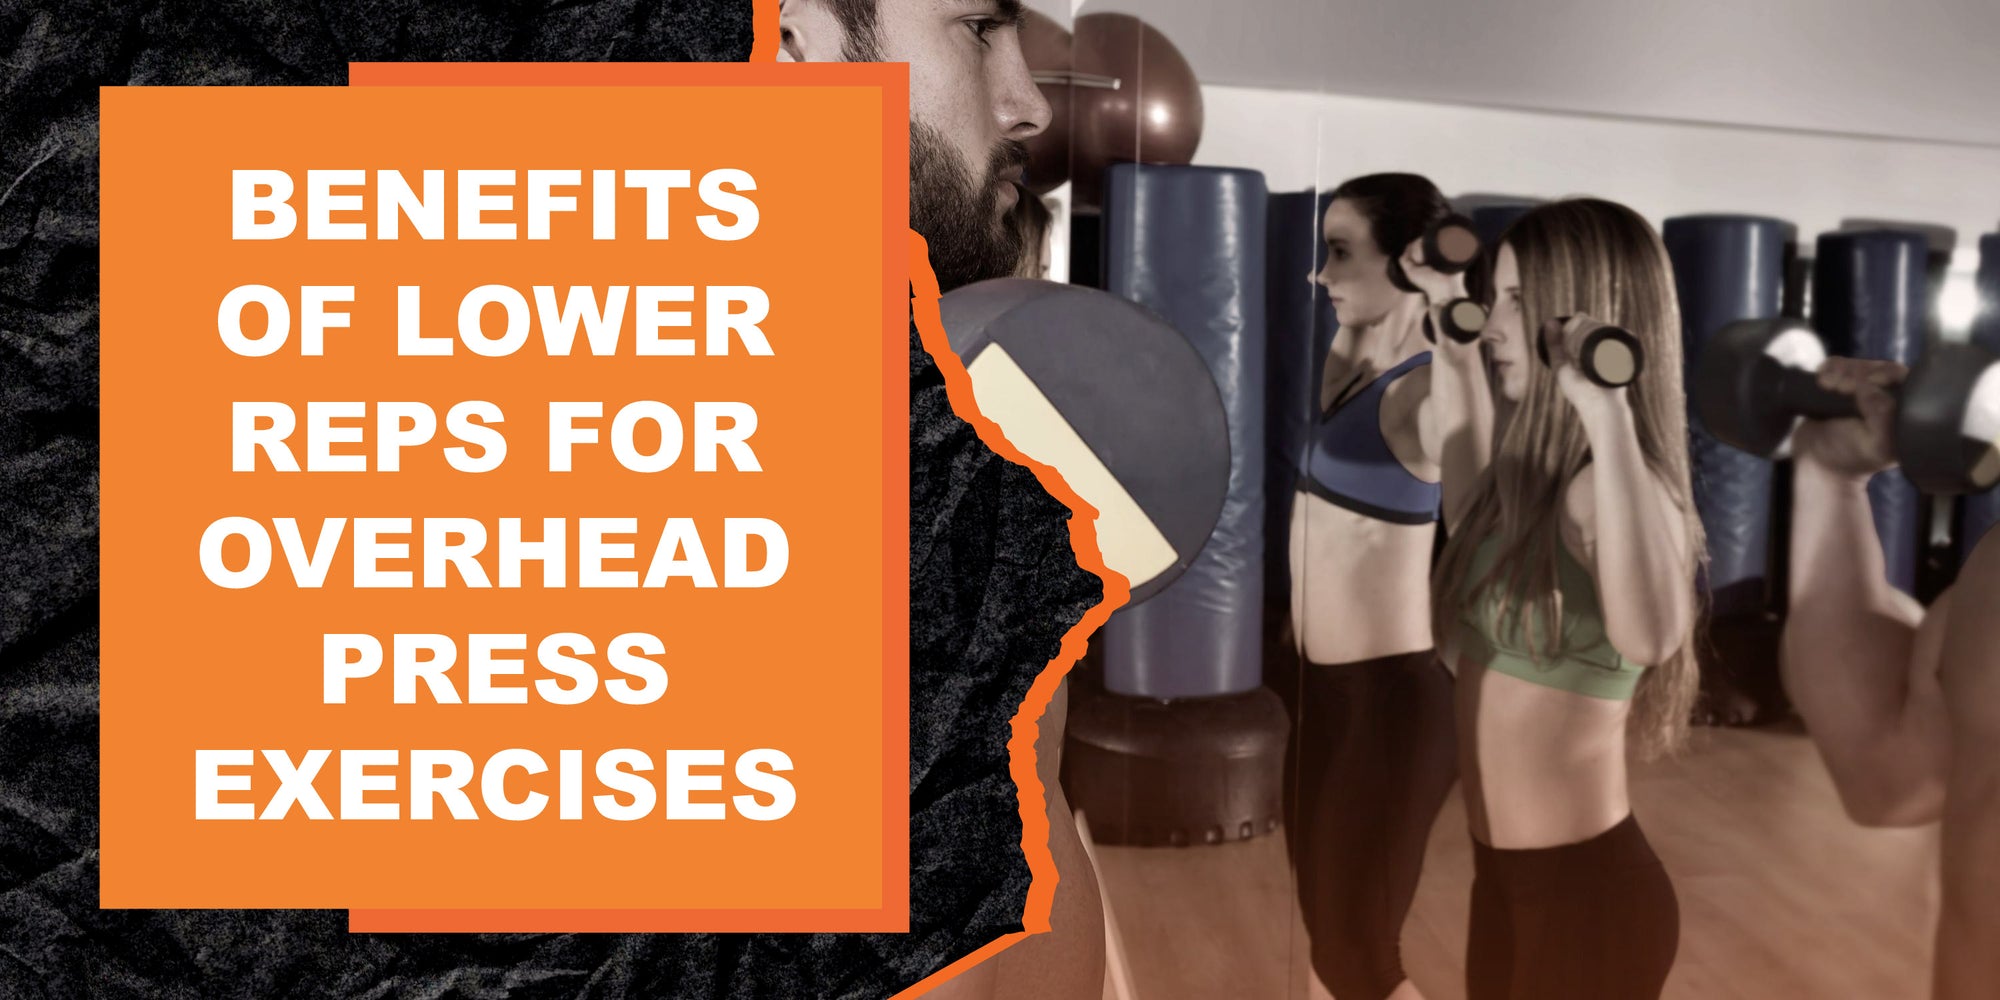 The Benefits of Doing Lower Reps with Overhead Press Exercises